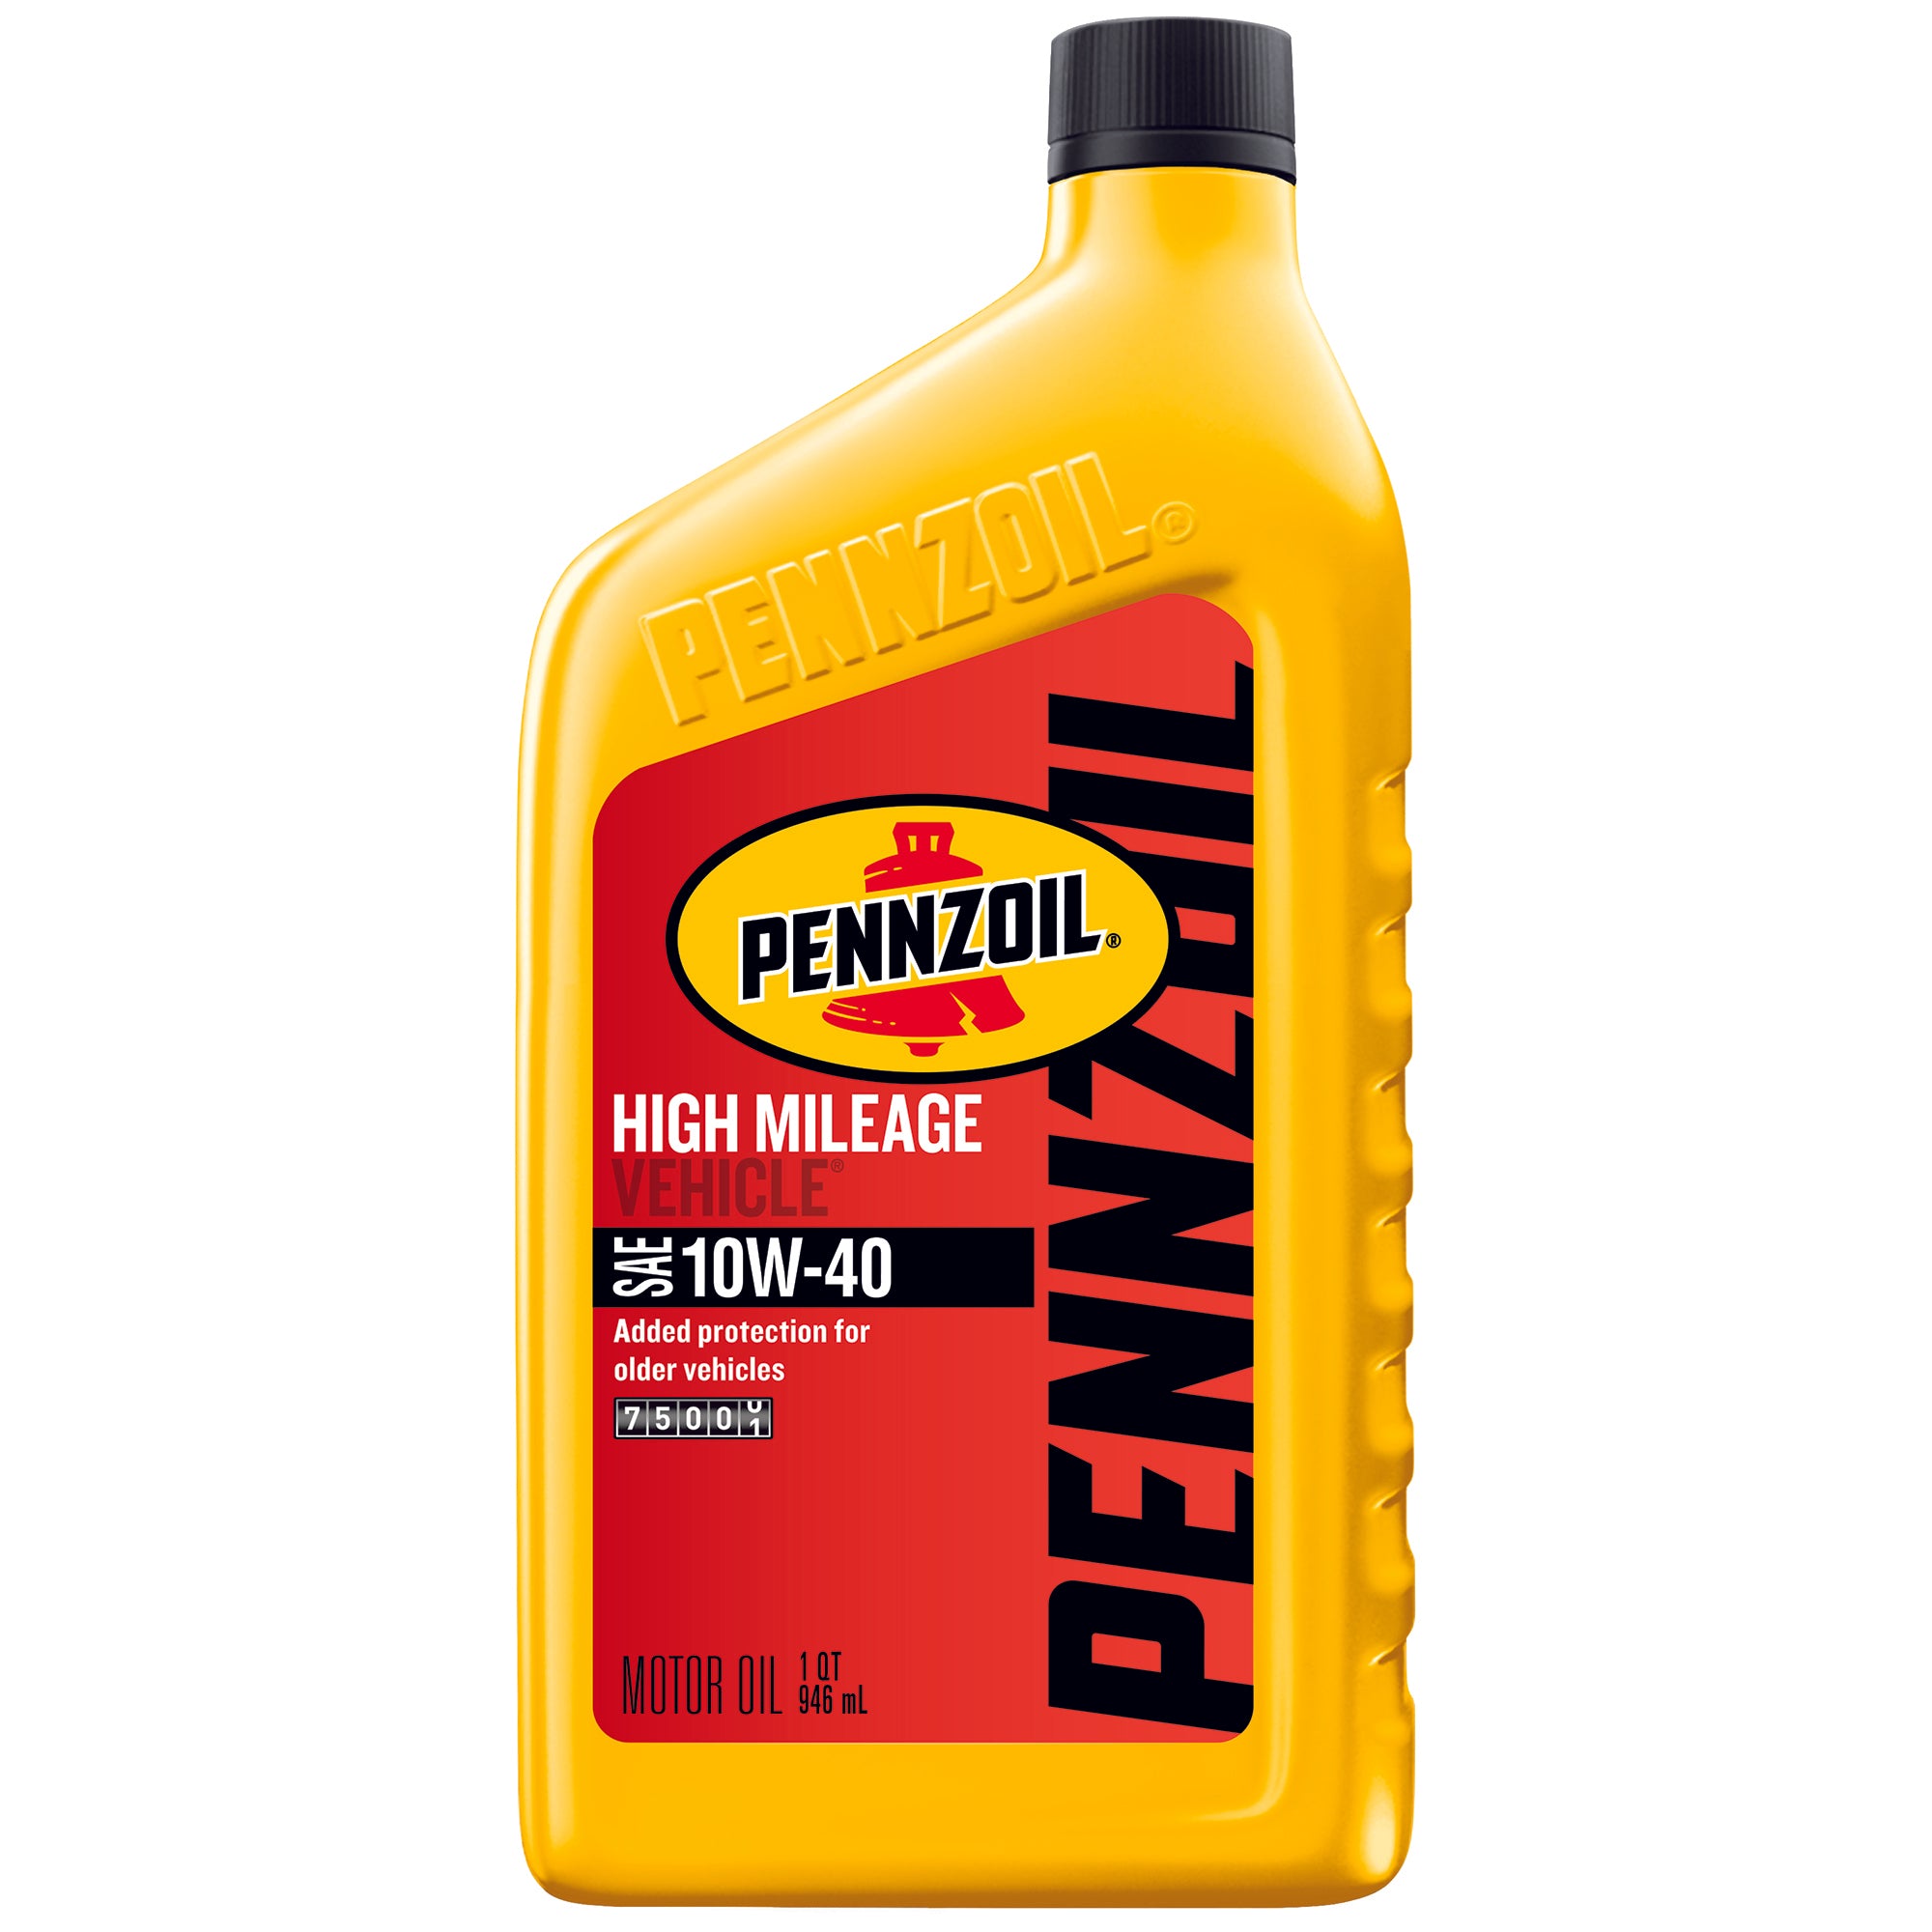 Pennzoil High Mileage Vehicle SAE 10W 40 Motor Oil Case of 6 1 qt